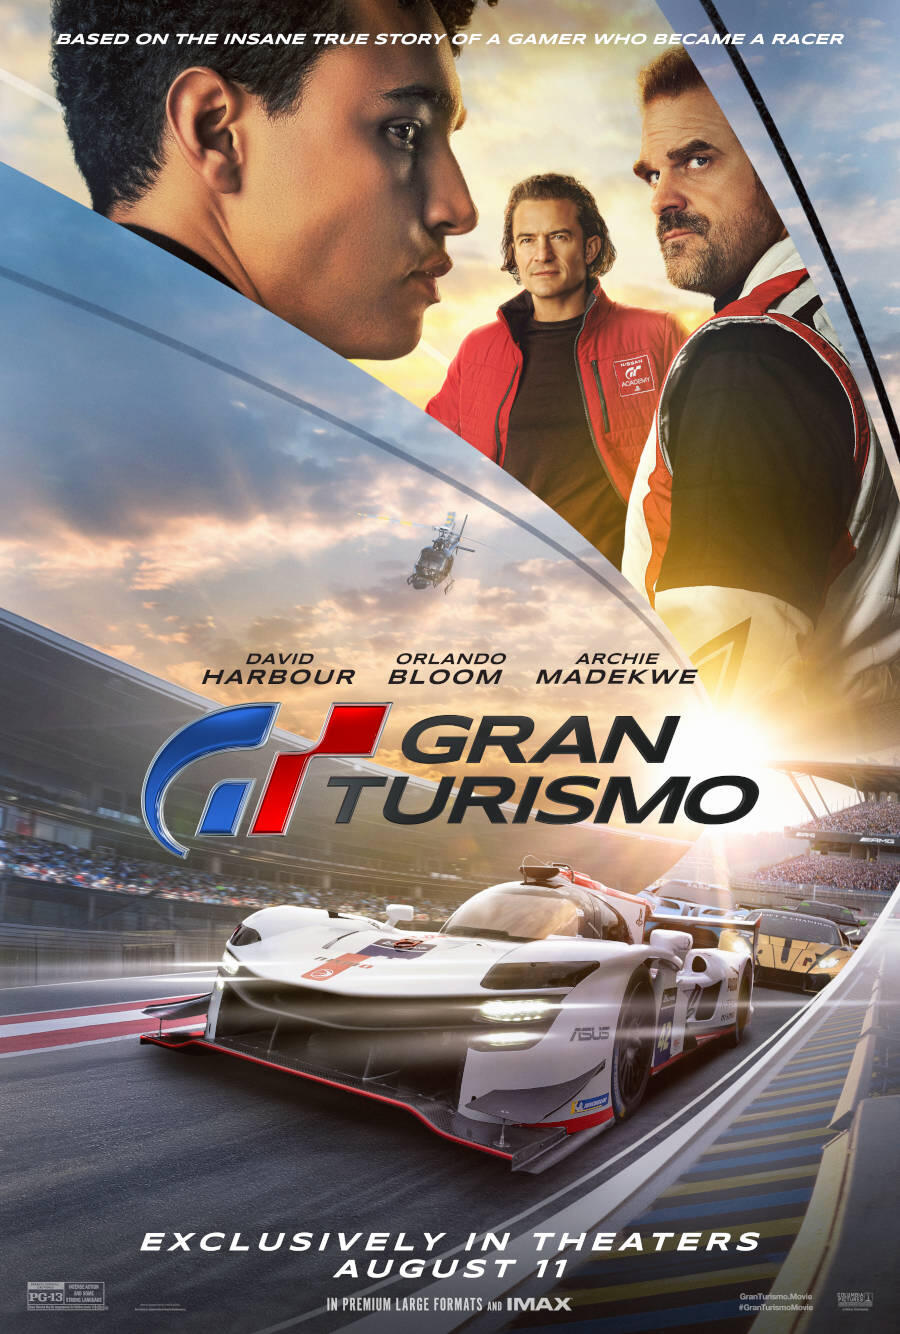 Gran Turismo: Based on a True Story (2023) Showtimes